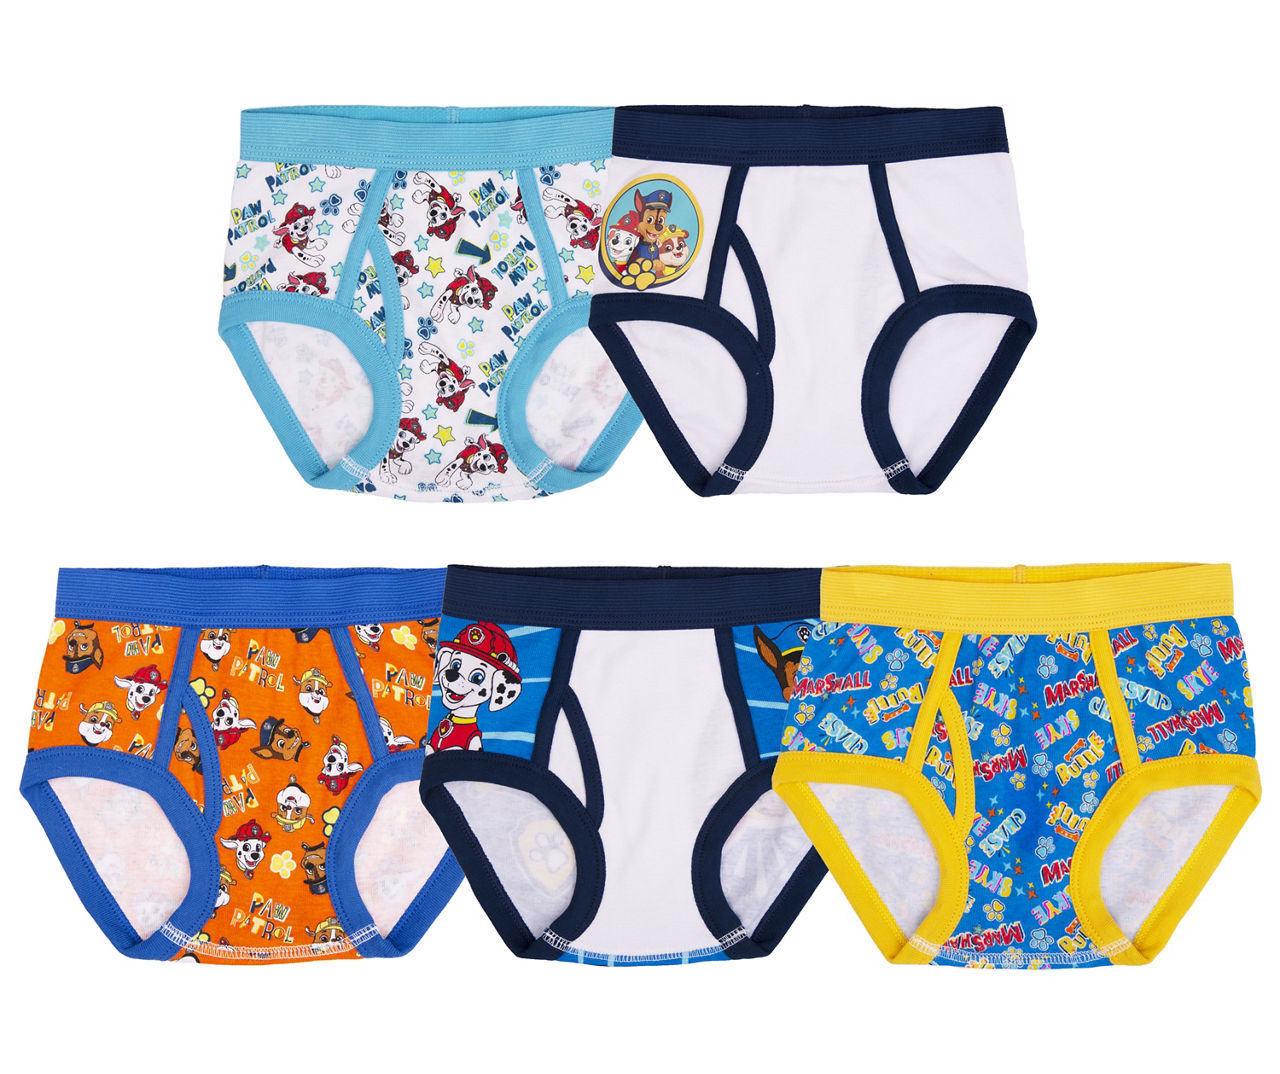 Kids' Size 6 Blue, Navy & White Briefs With Coloring Page, 5-Pack